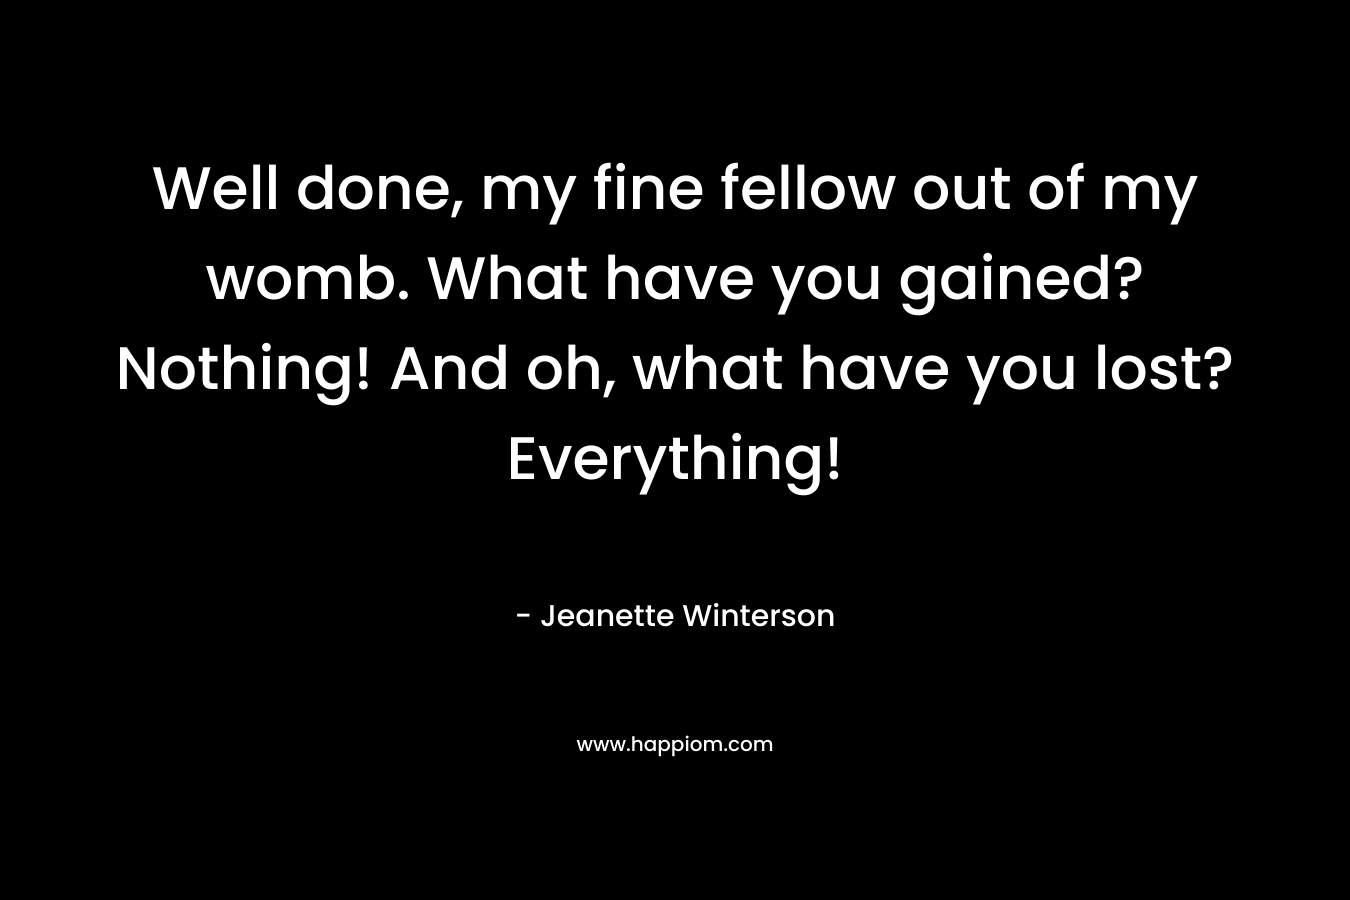 Well done, my fine fellow out of my womb. What have you gained? Nothing! And oh, what have you lost? Everything! – Jeanette Winterson